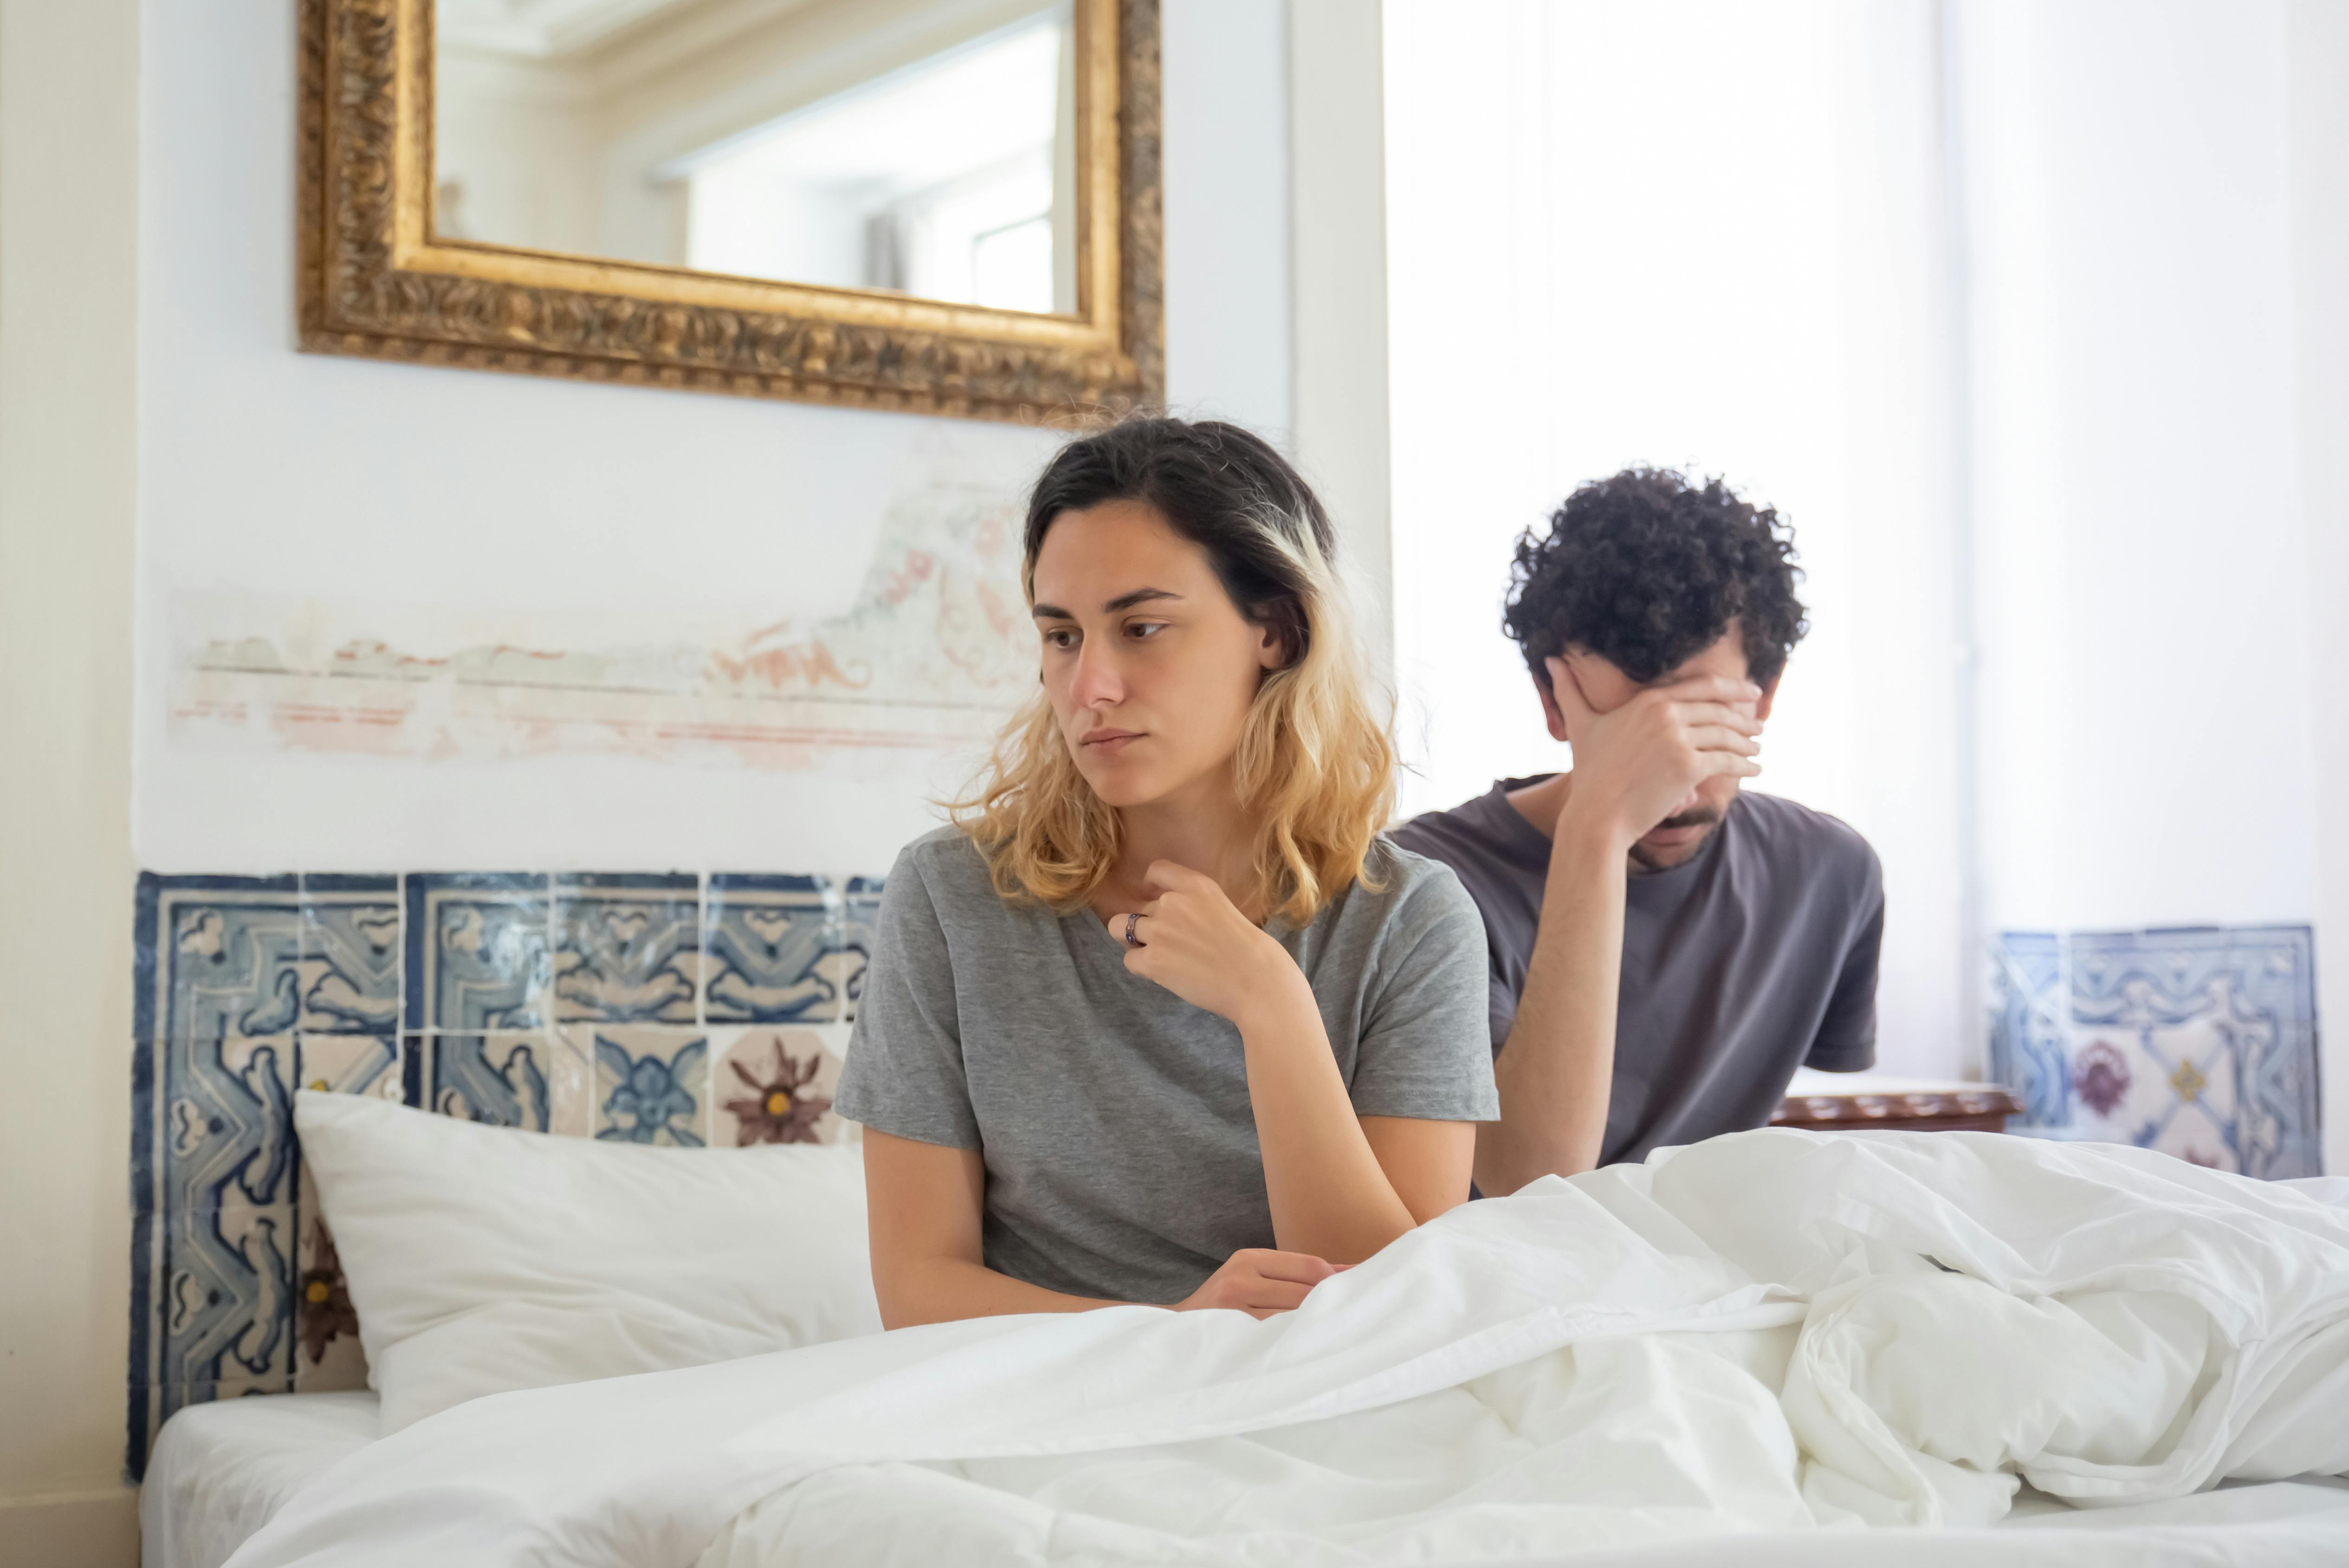 Ian and Sophie, caught in bed | Source: Pexels